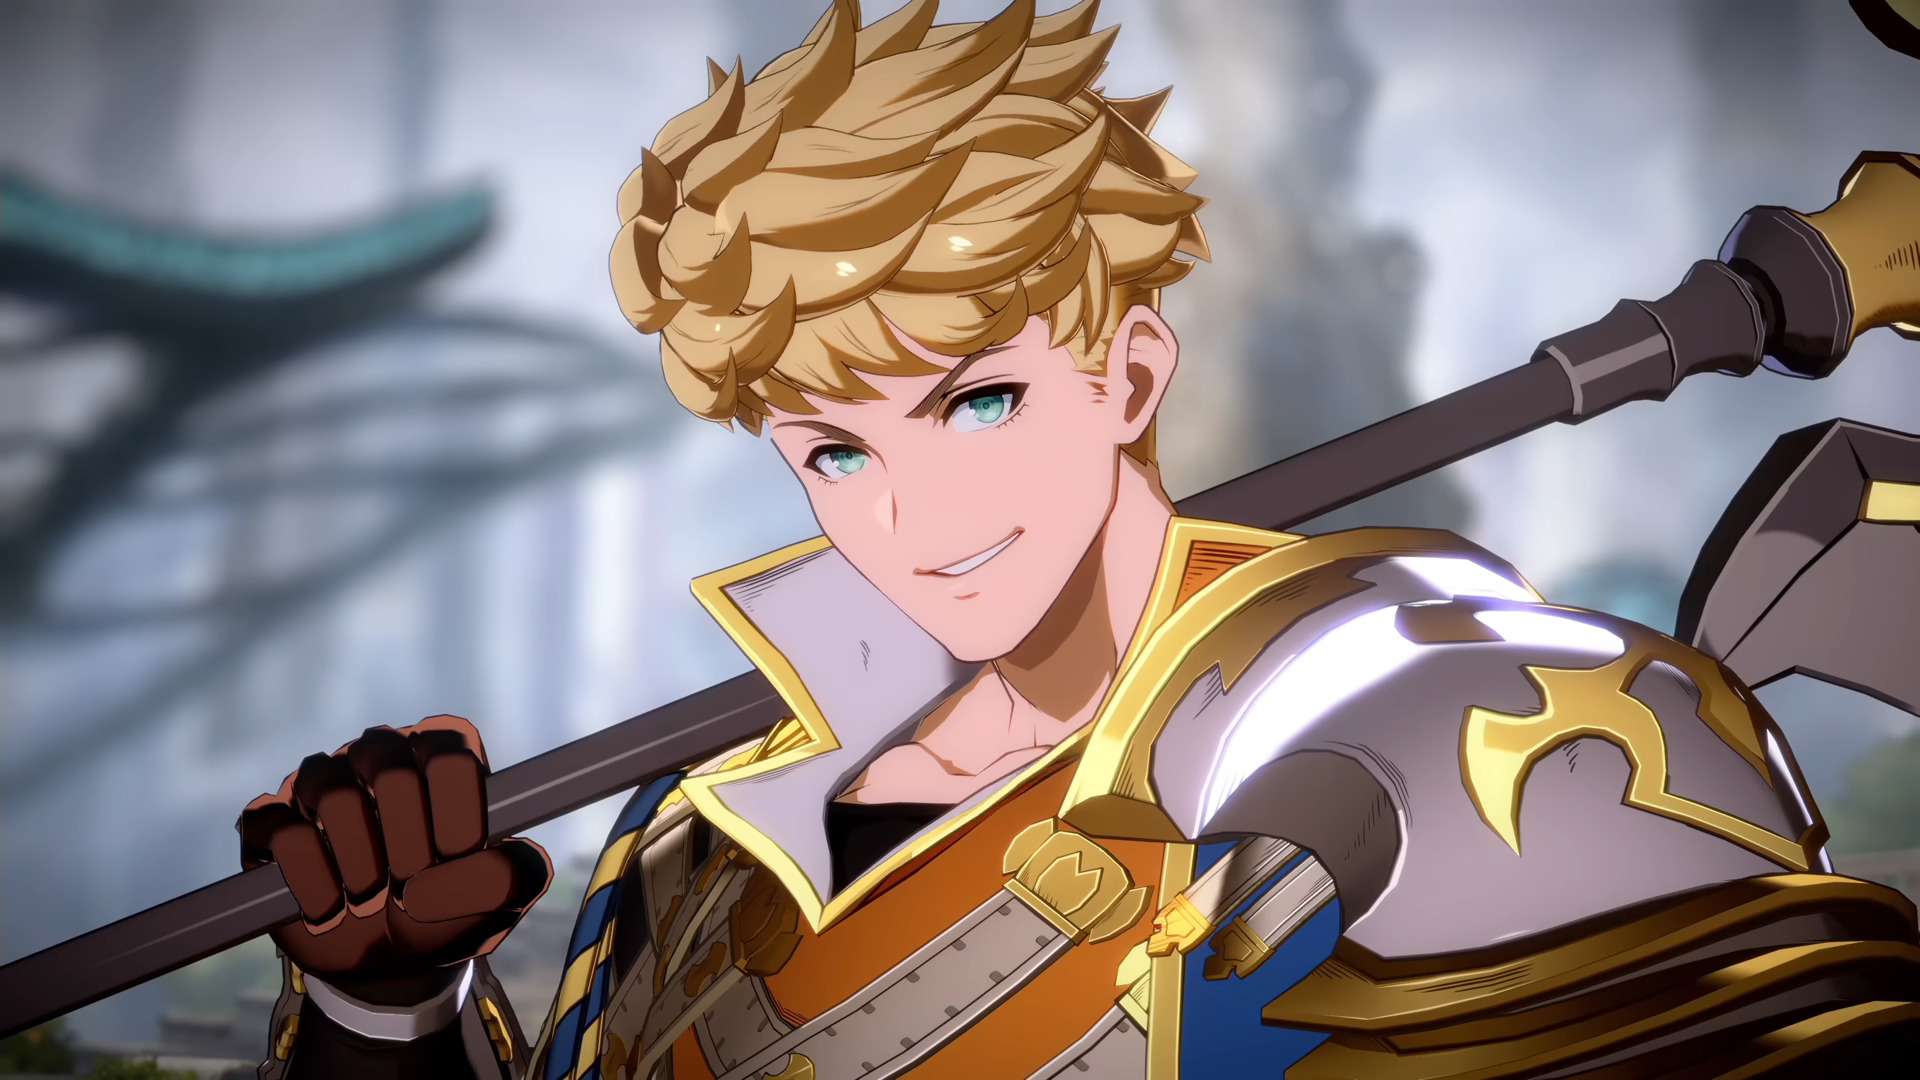 On the 2nd of April, the character Vane will join Granblue Fantasy Versus: Rising